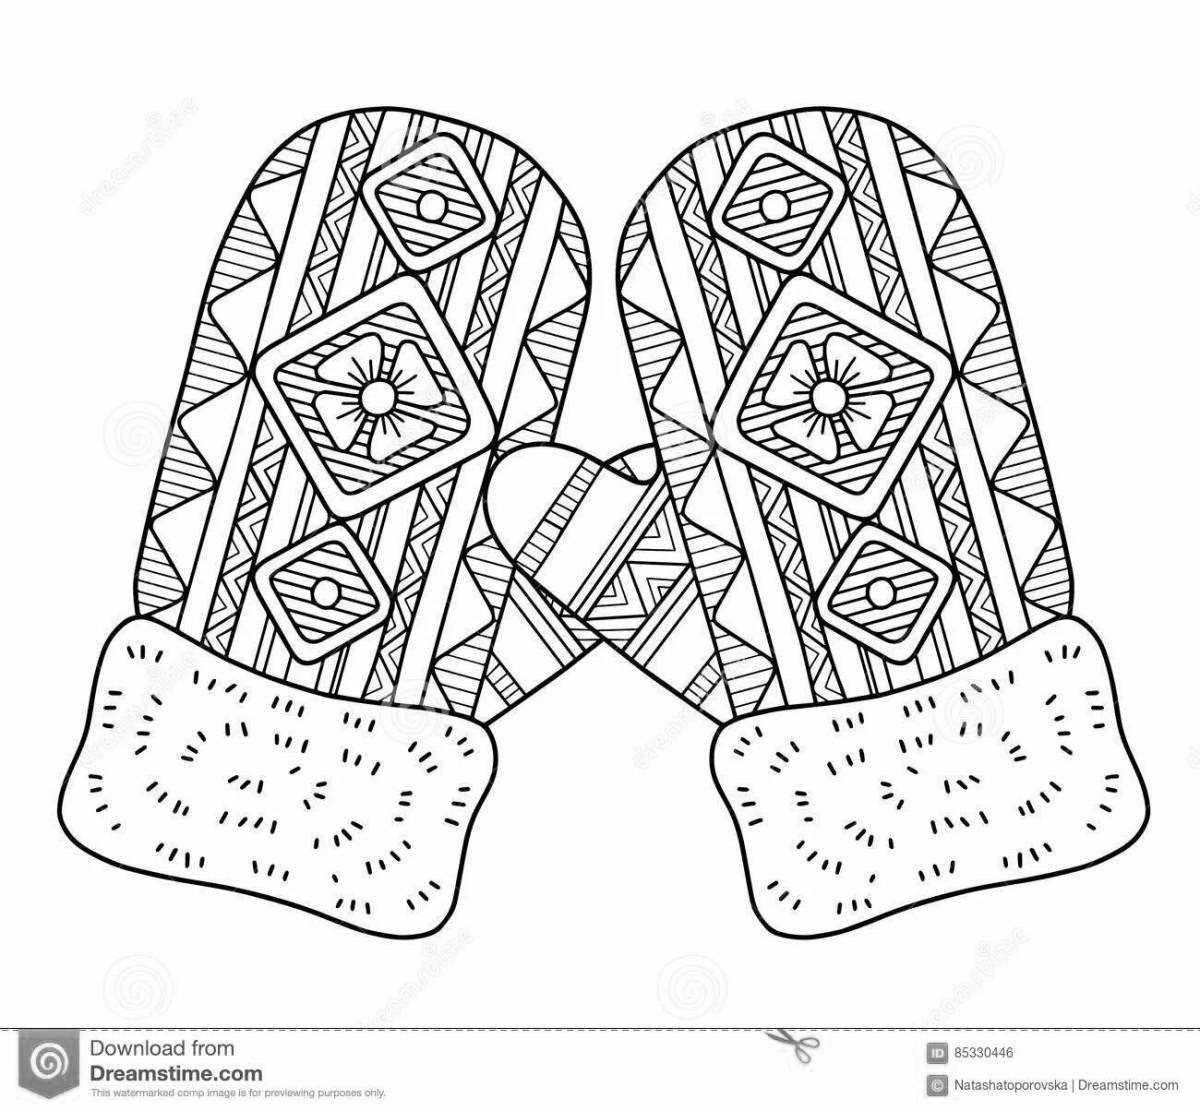 Coloring page of mittens with live pattern